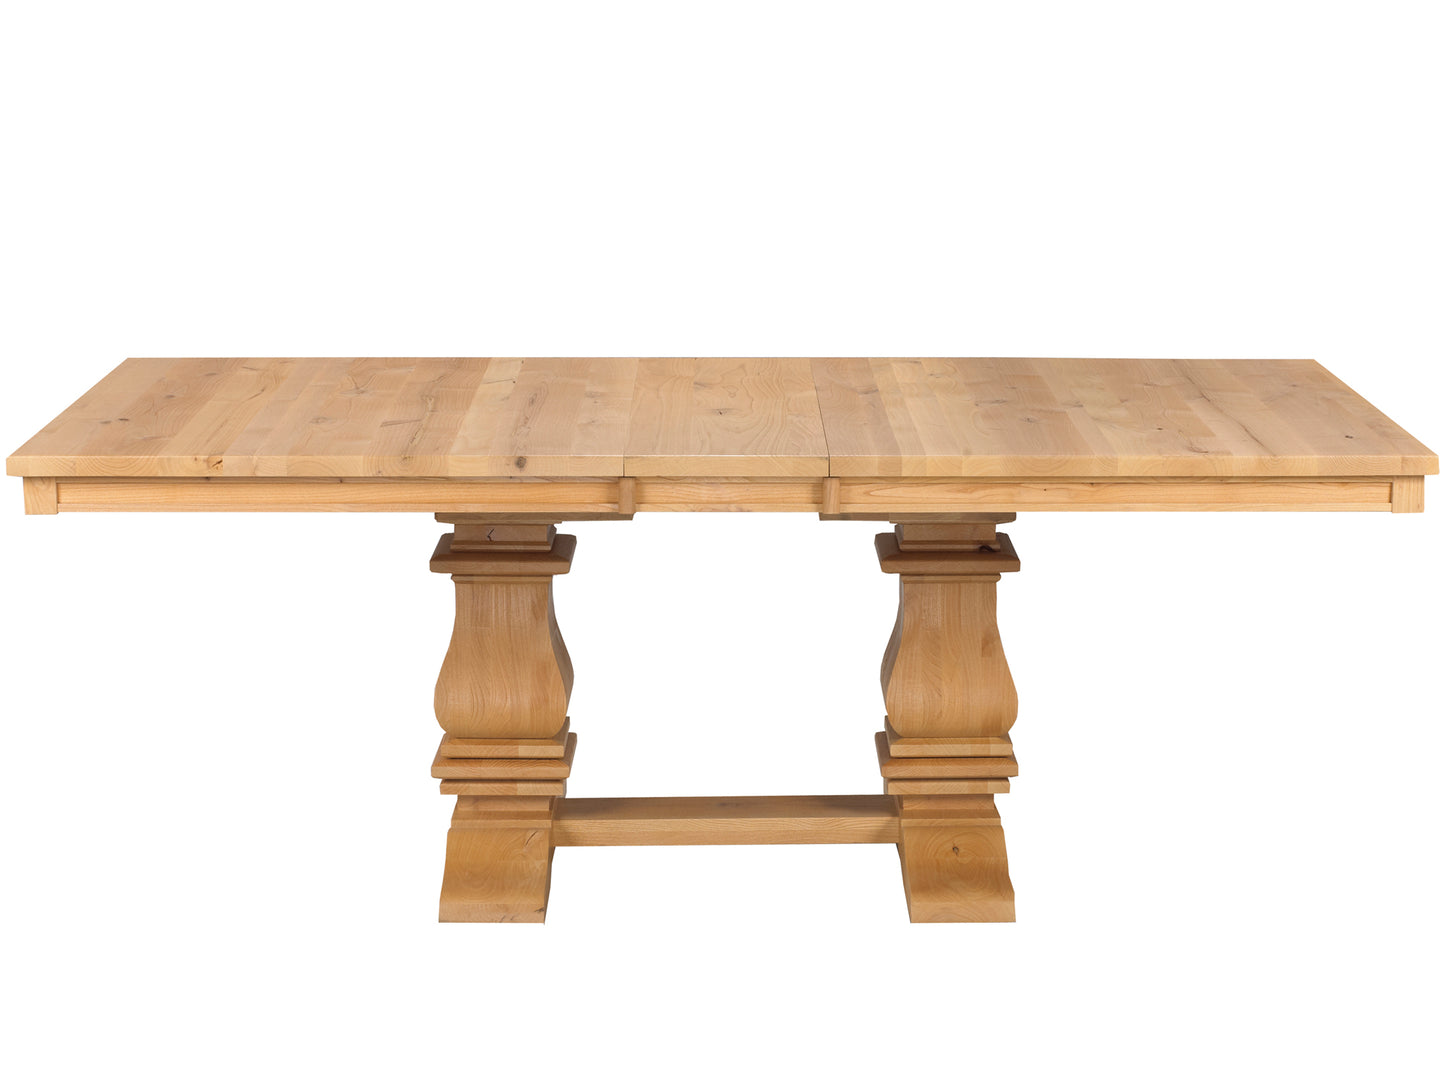 Mediterranean Dining Table, solid wood, custom furniture, Canadian made.